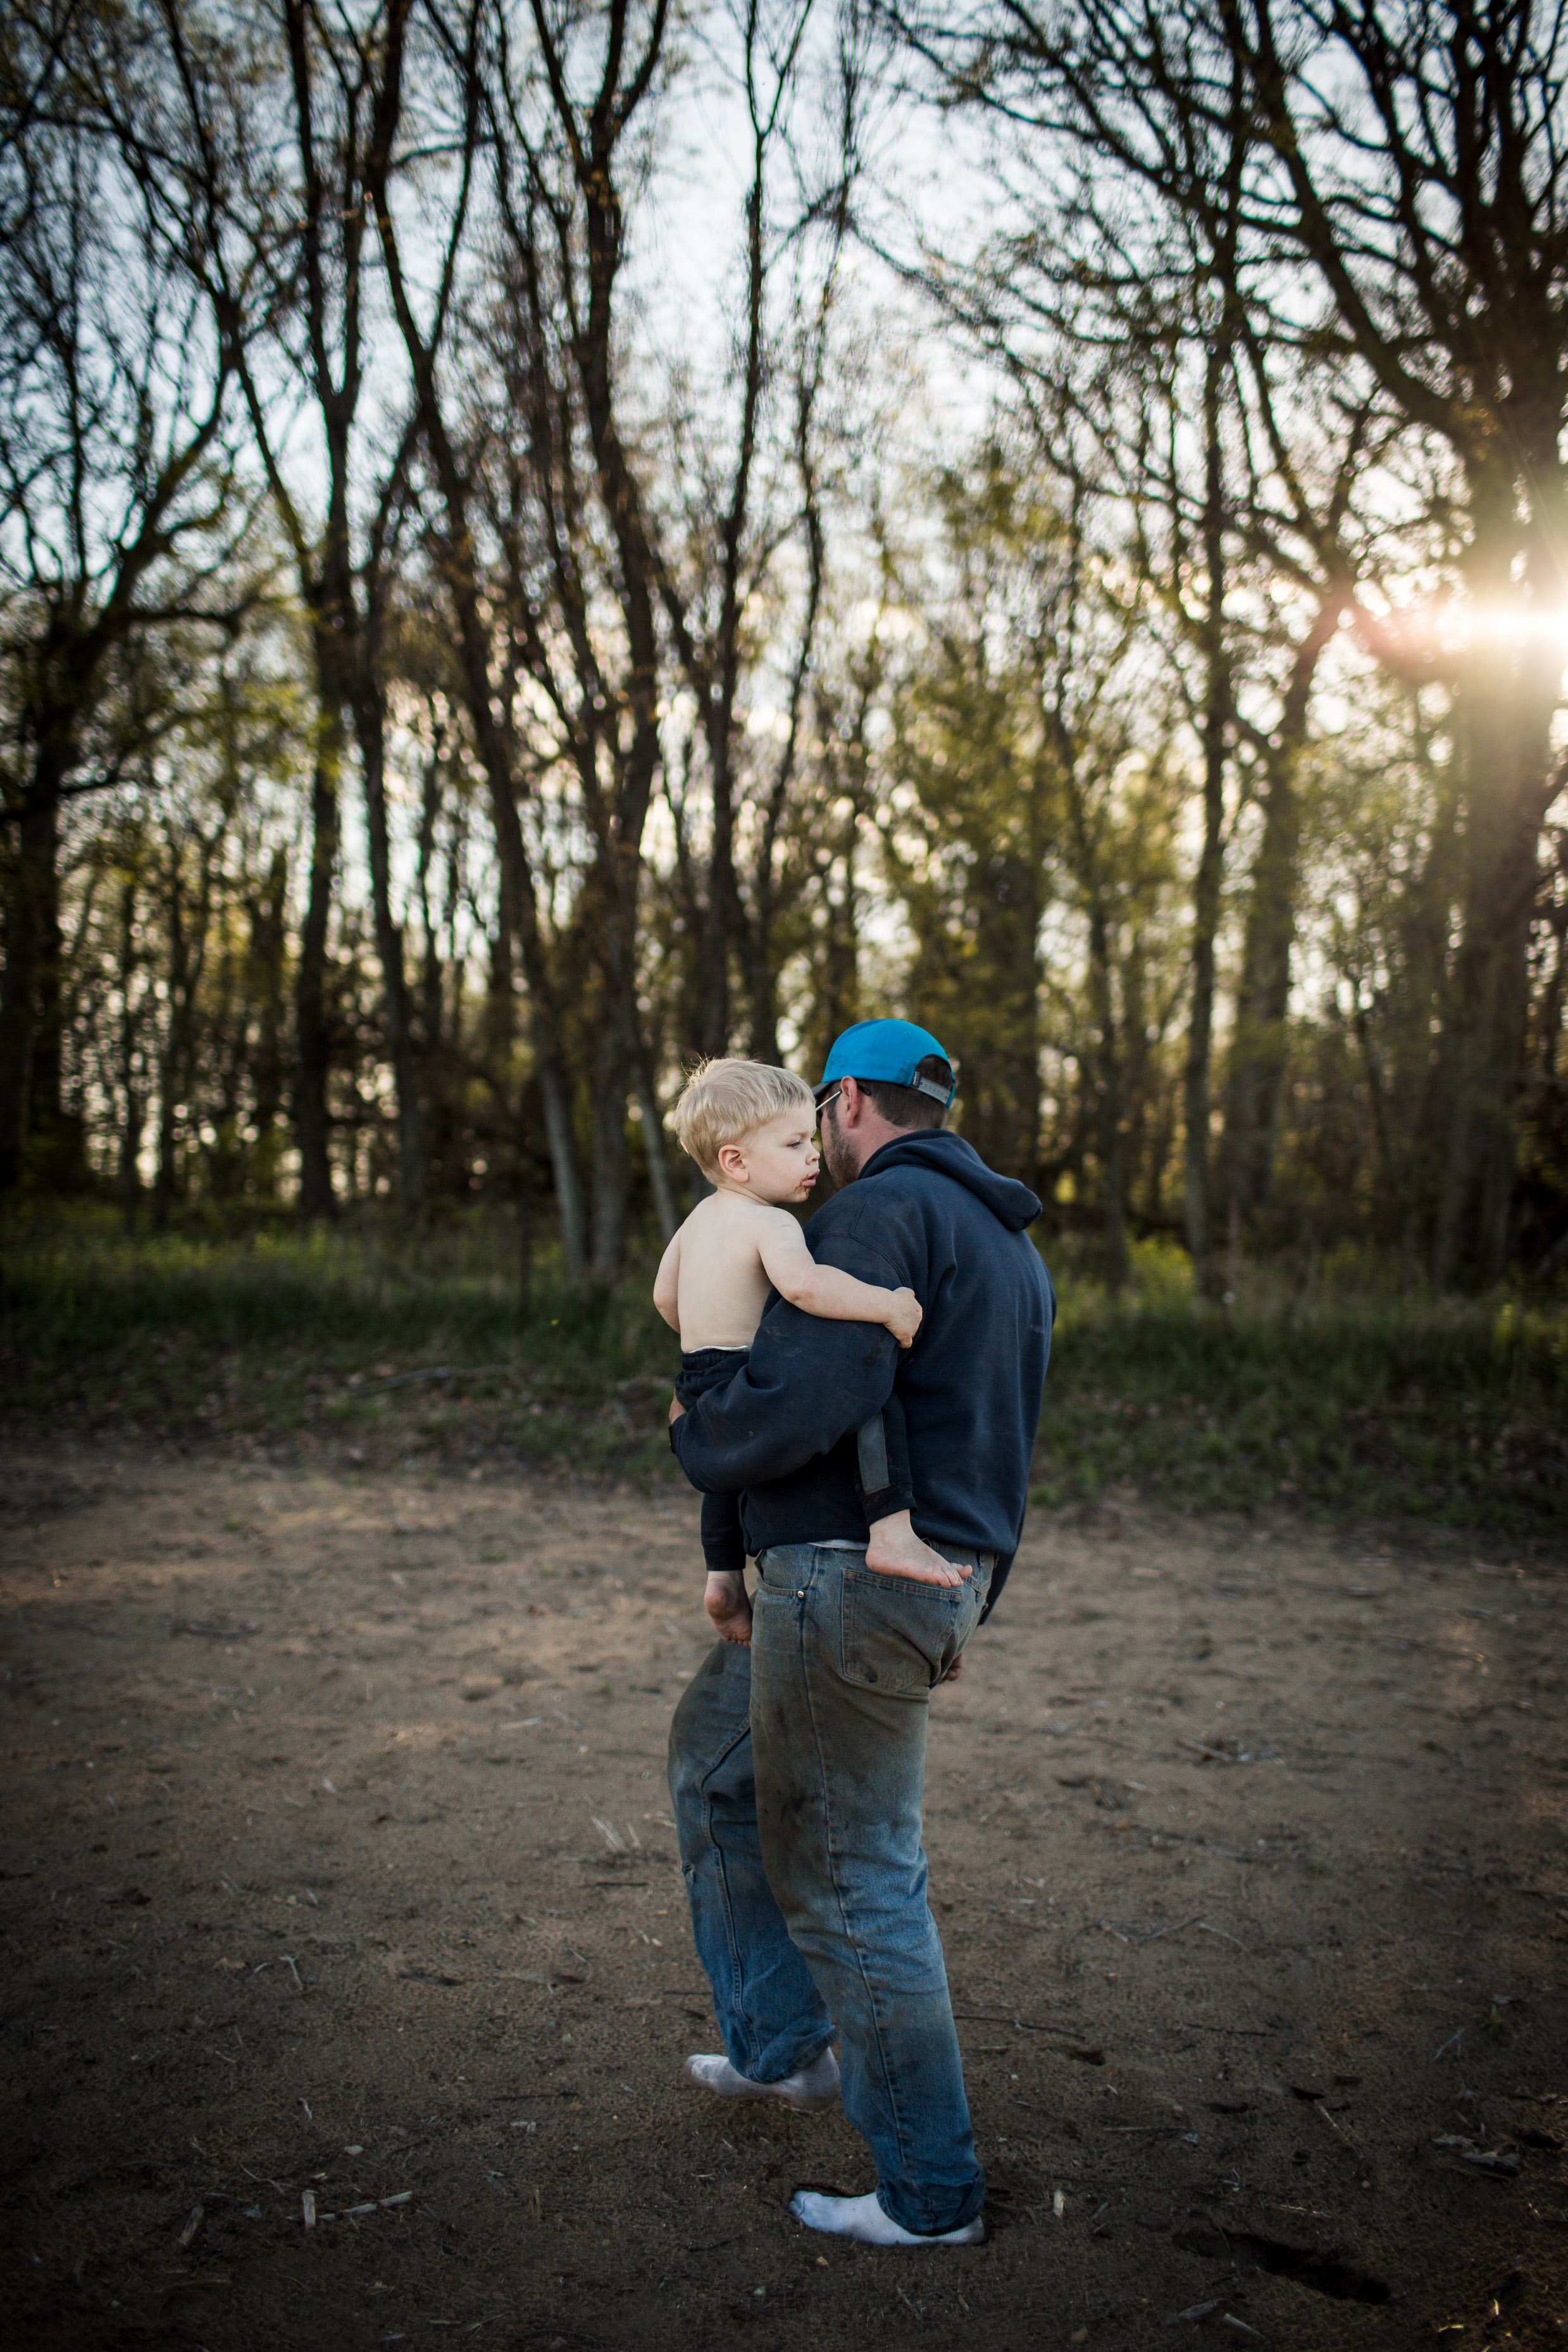 Exploring, Connected, Powerful, Lifestyle Family Sunset Session, Farm, Indiana, Laura Duggleby Photography-29.JPG